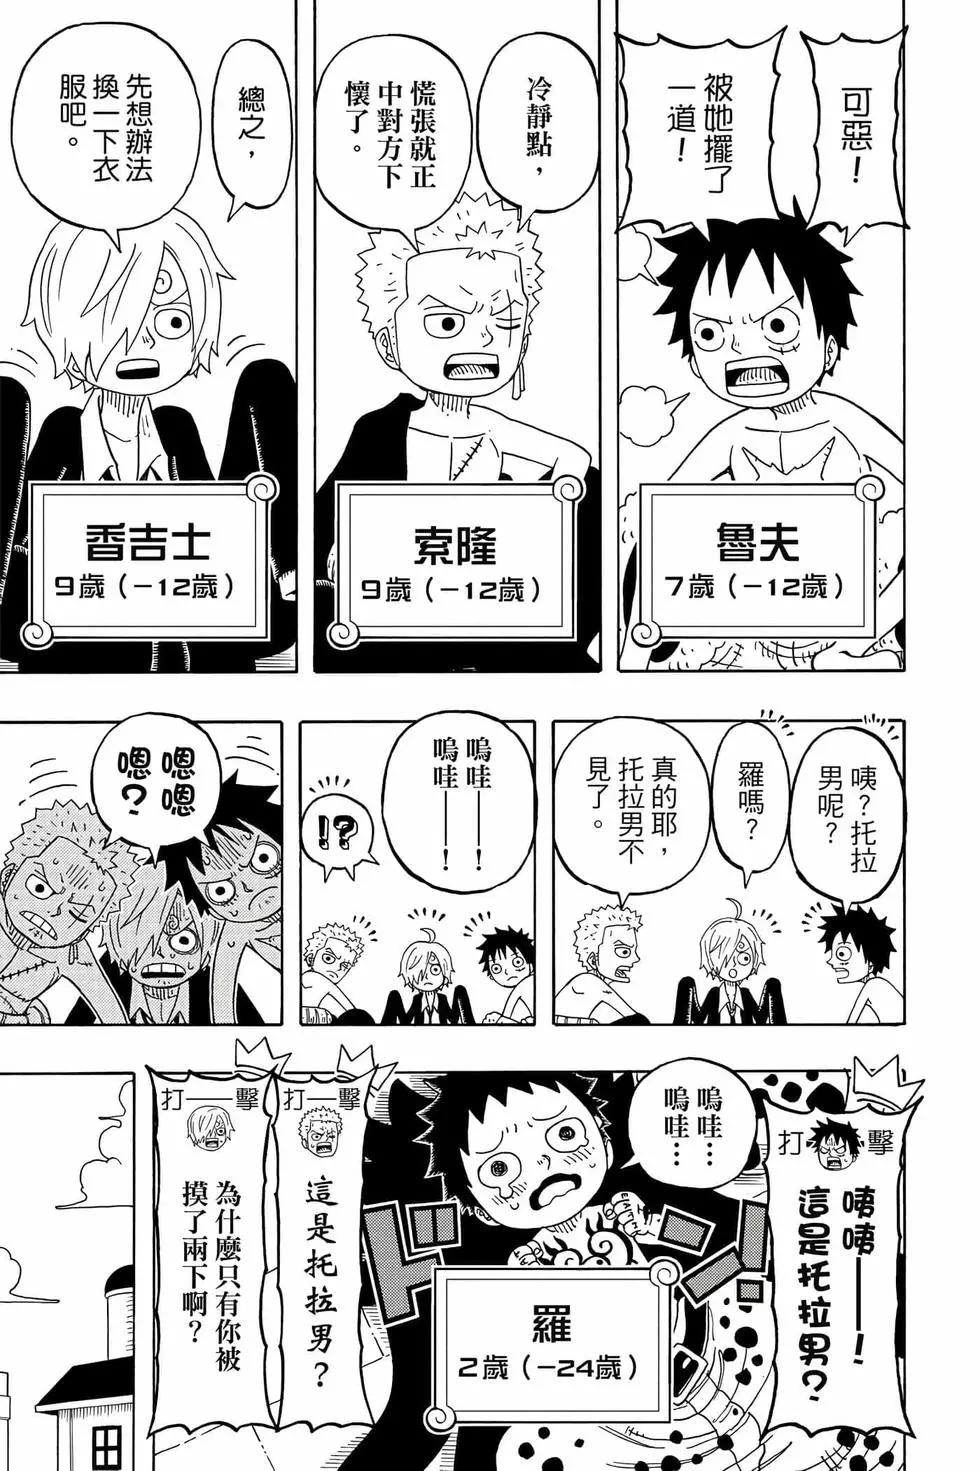 One piece party - 第05卷(1/4) - 6